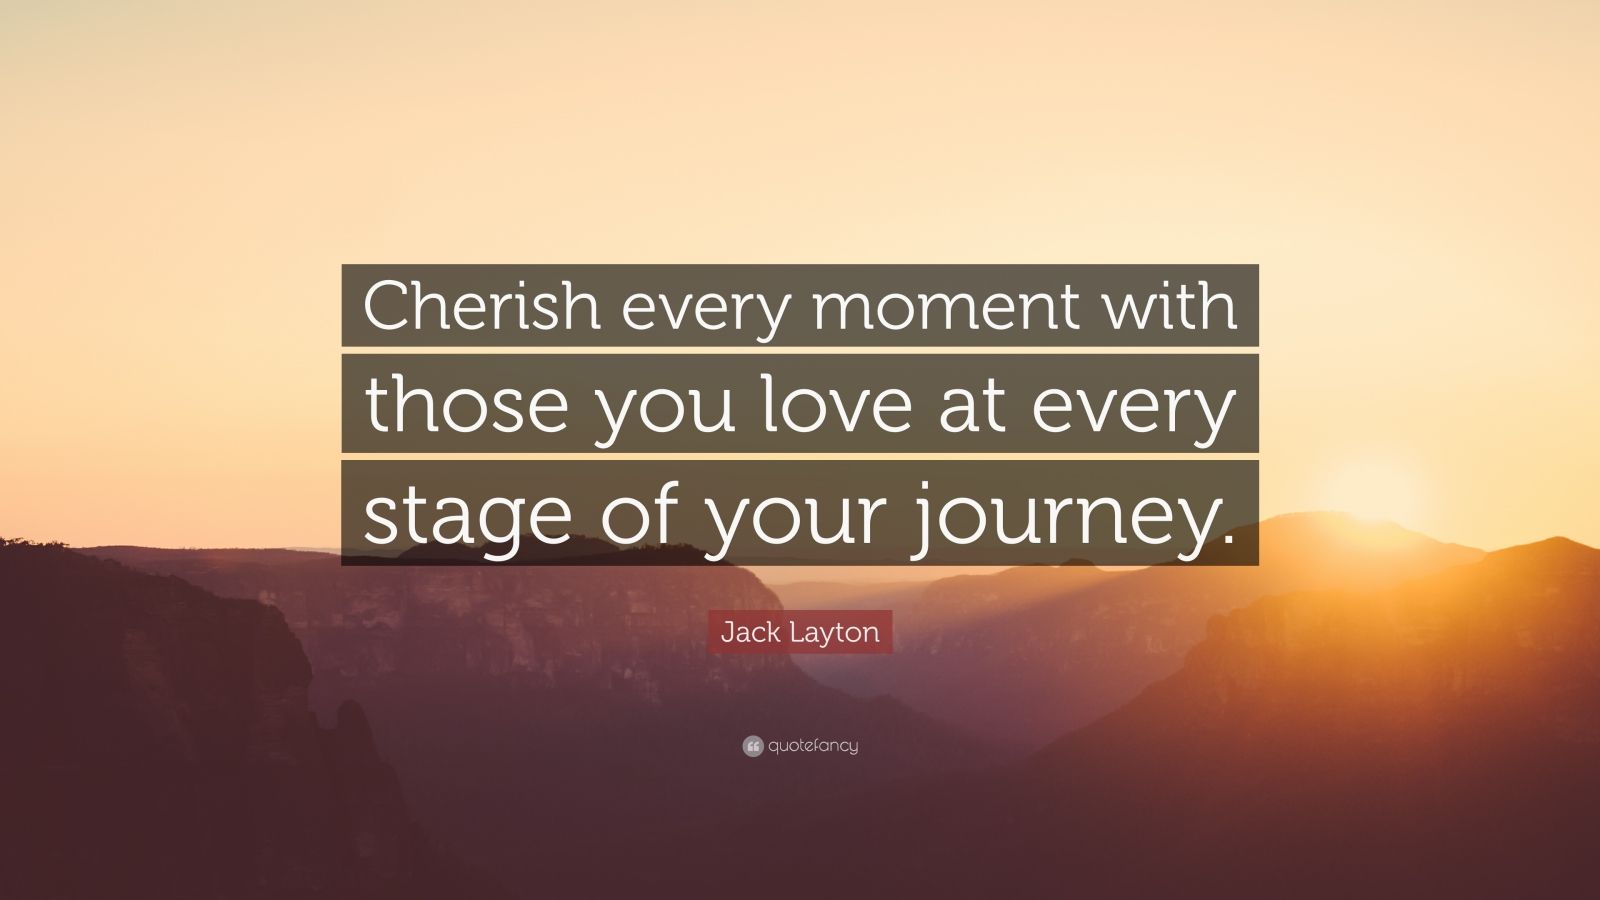 Jack Layton Quote “cherish Every Moment With Those You Love At Every Stage Of Your Journey” 9 5635